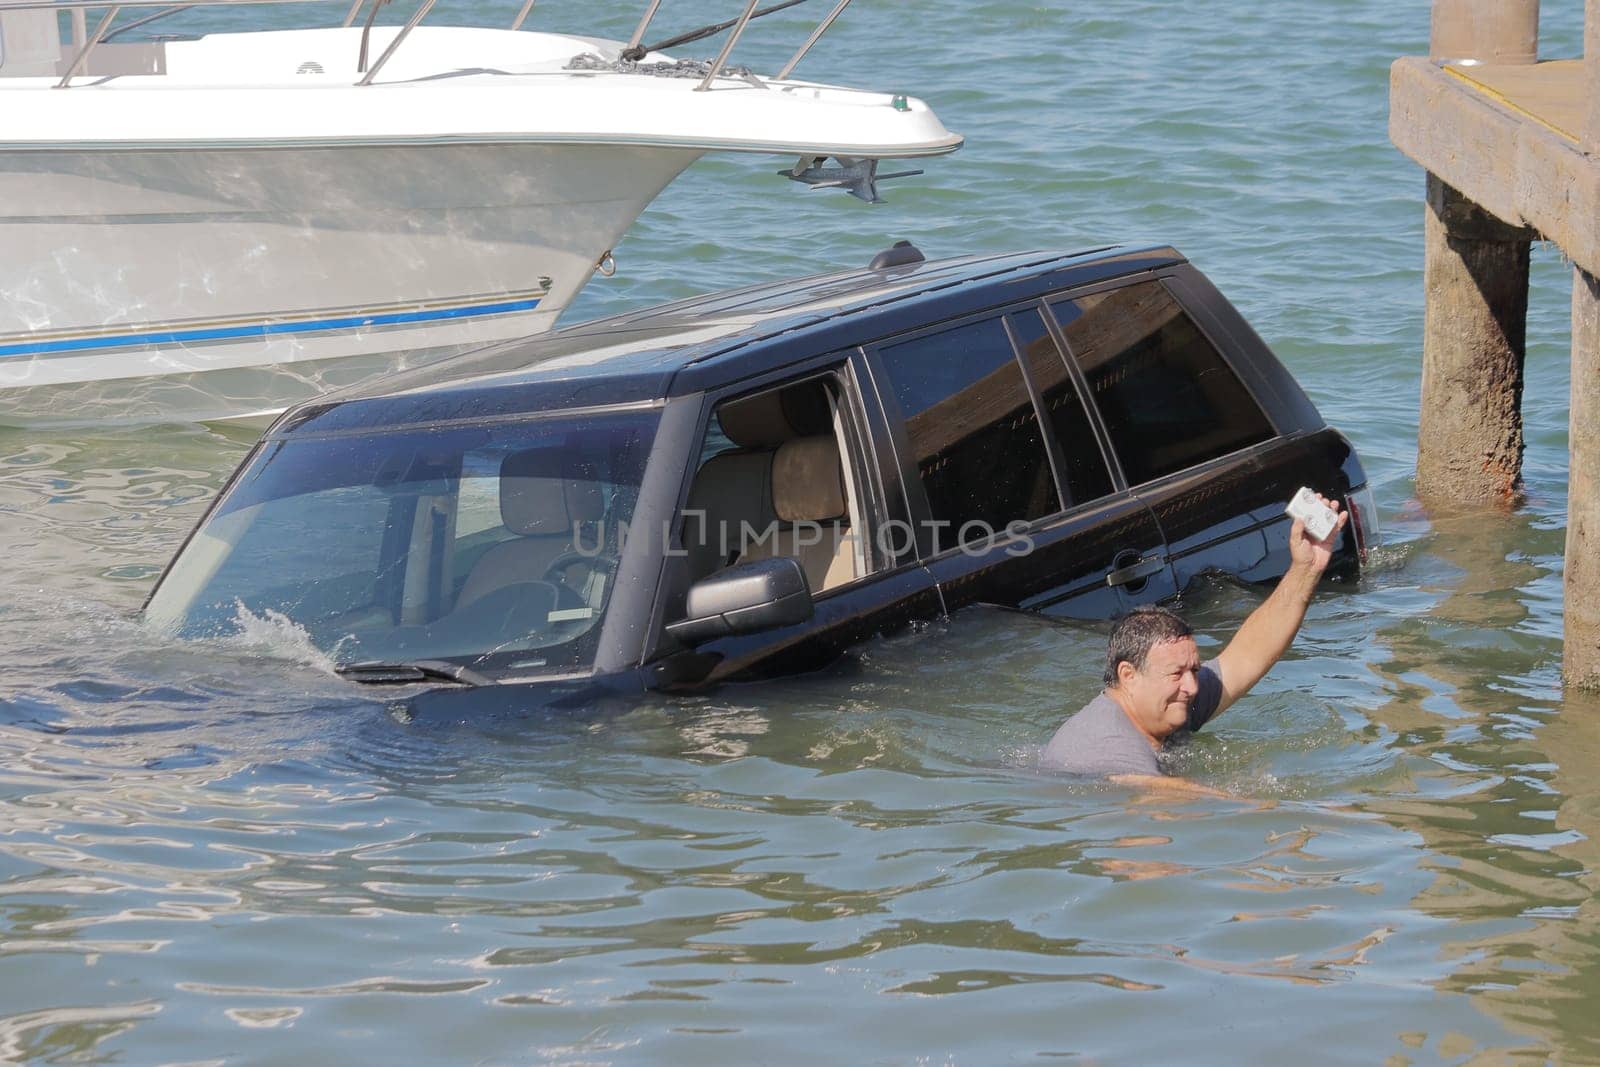 Car submerged in water in front of boats in Miami bay.